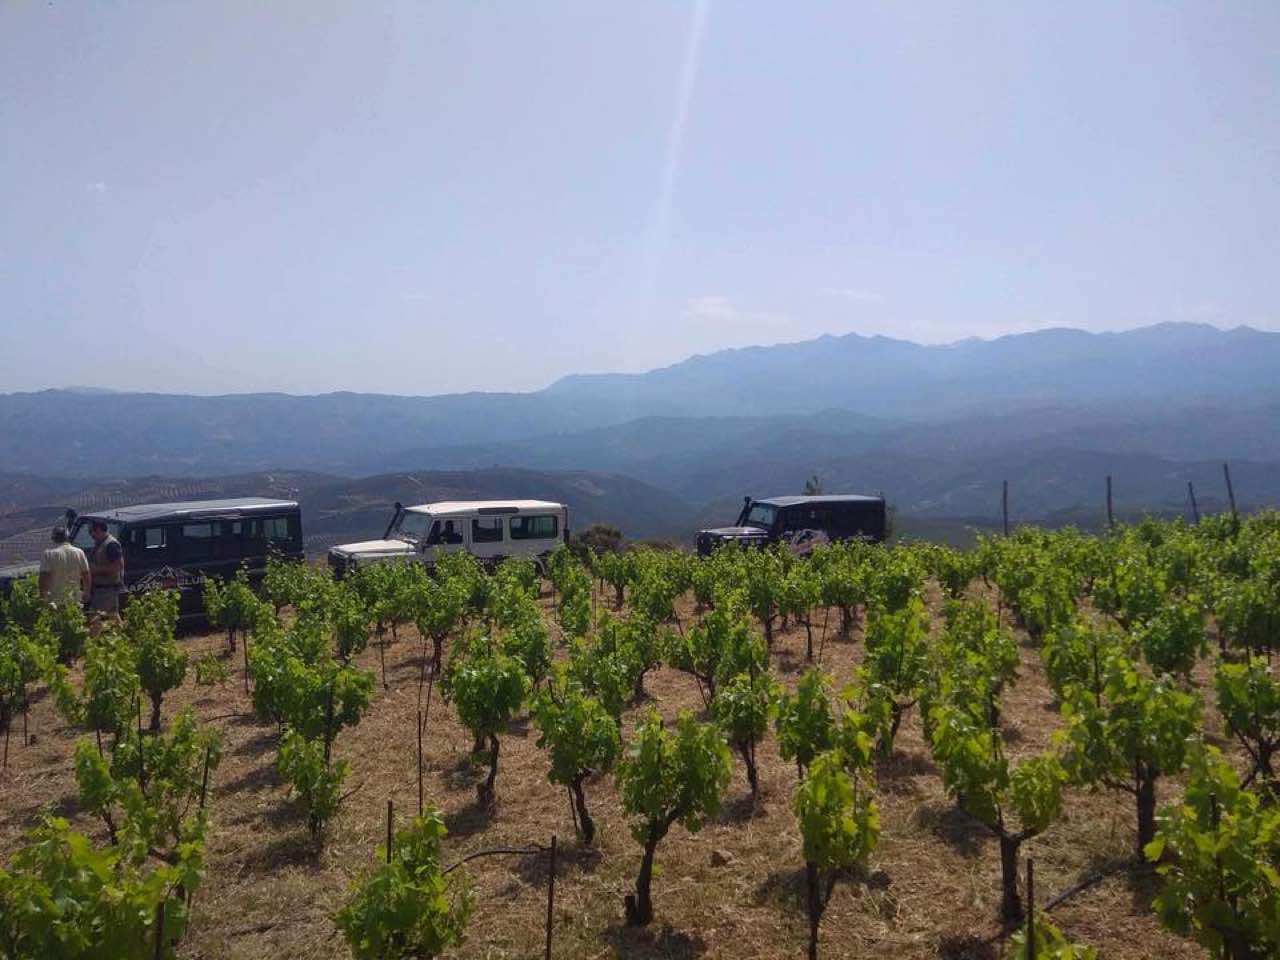 Exclusive Tour to Manousakis Winery & Vineyards, Unique Wine Tasting Experience chania crete, vatolakos manousakis winery, wine tasting, safari jeep tour winery, off road tour private wine tasting, best bio winery greece, manousaki winery chania crete